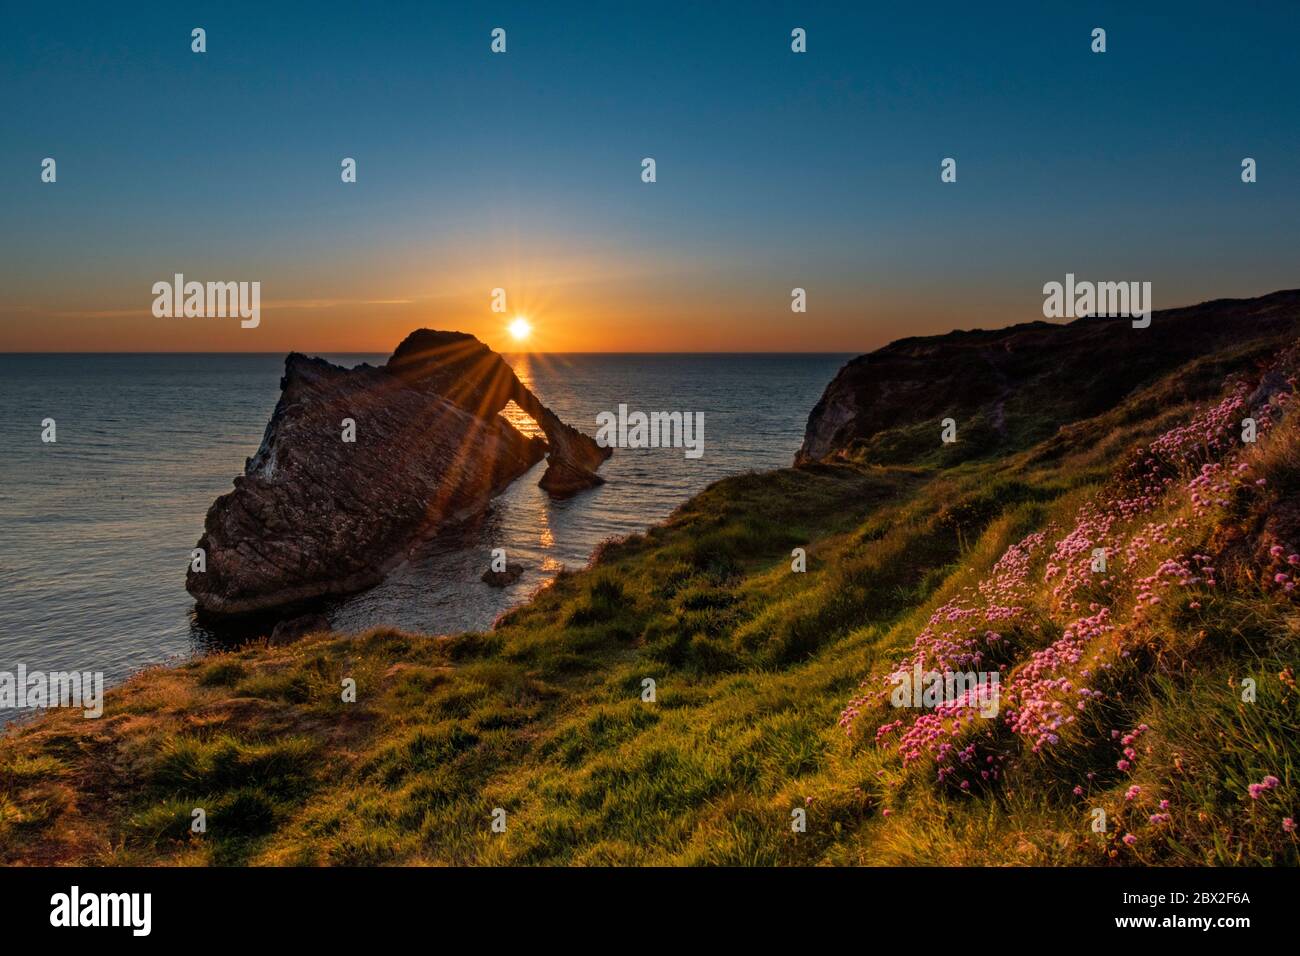 BOW FIDDLE ROCK PORTKNOCKIE THE MORAY COAST SCOTLAND MAY MORNING SUNRISE AND SUN RAYS WITH PINK SEA THRIFT FLOWERS Armeria maritima ON THE CLIFFS Stock Photo